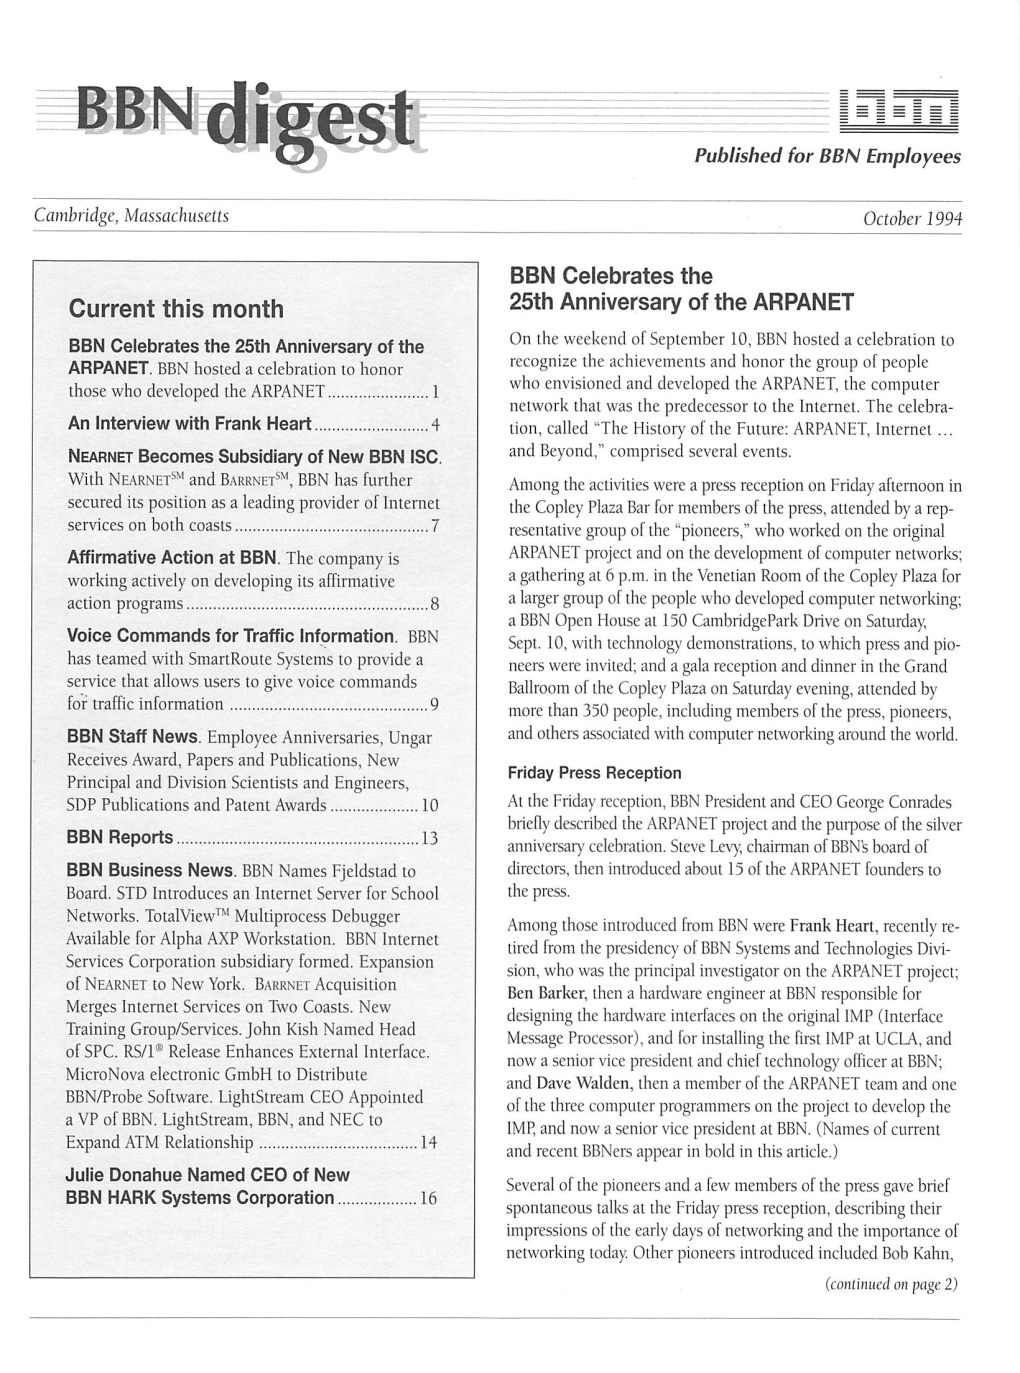 BBN Digest Published for BBN Employees